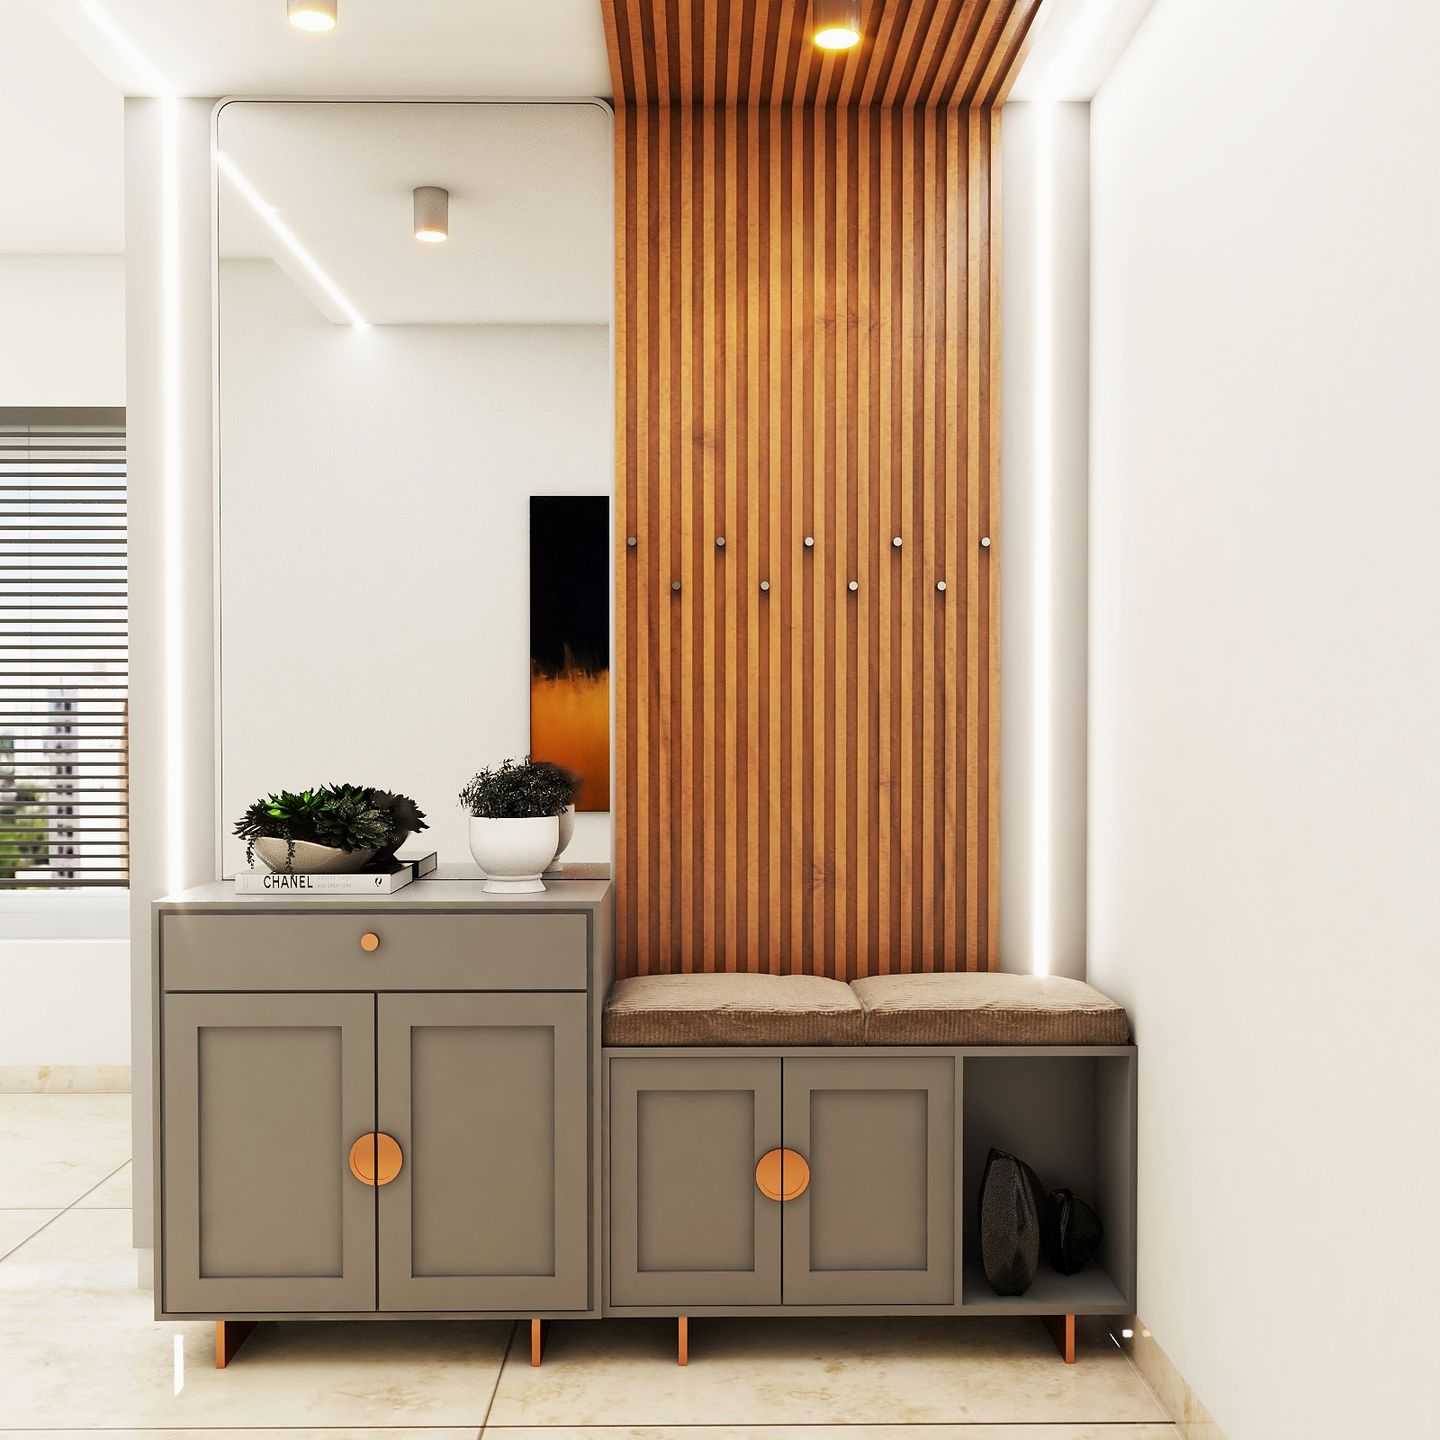 Foyer Design With Fluted Panels - Livspace